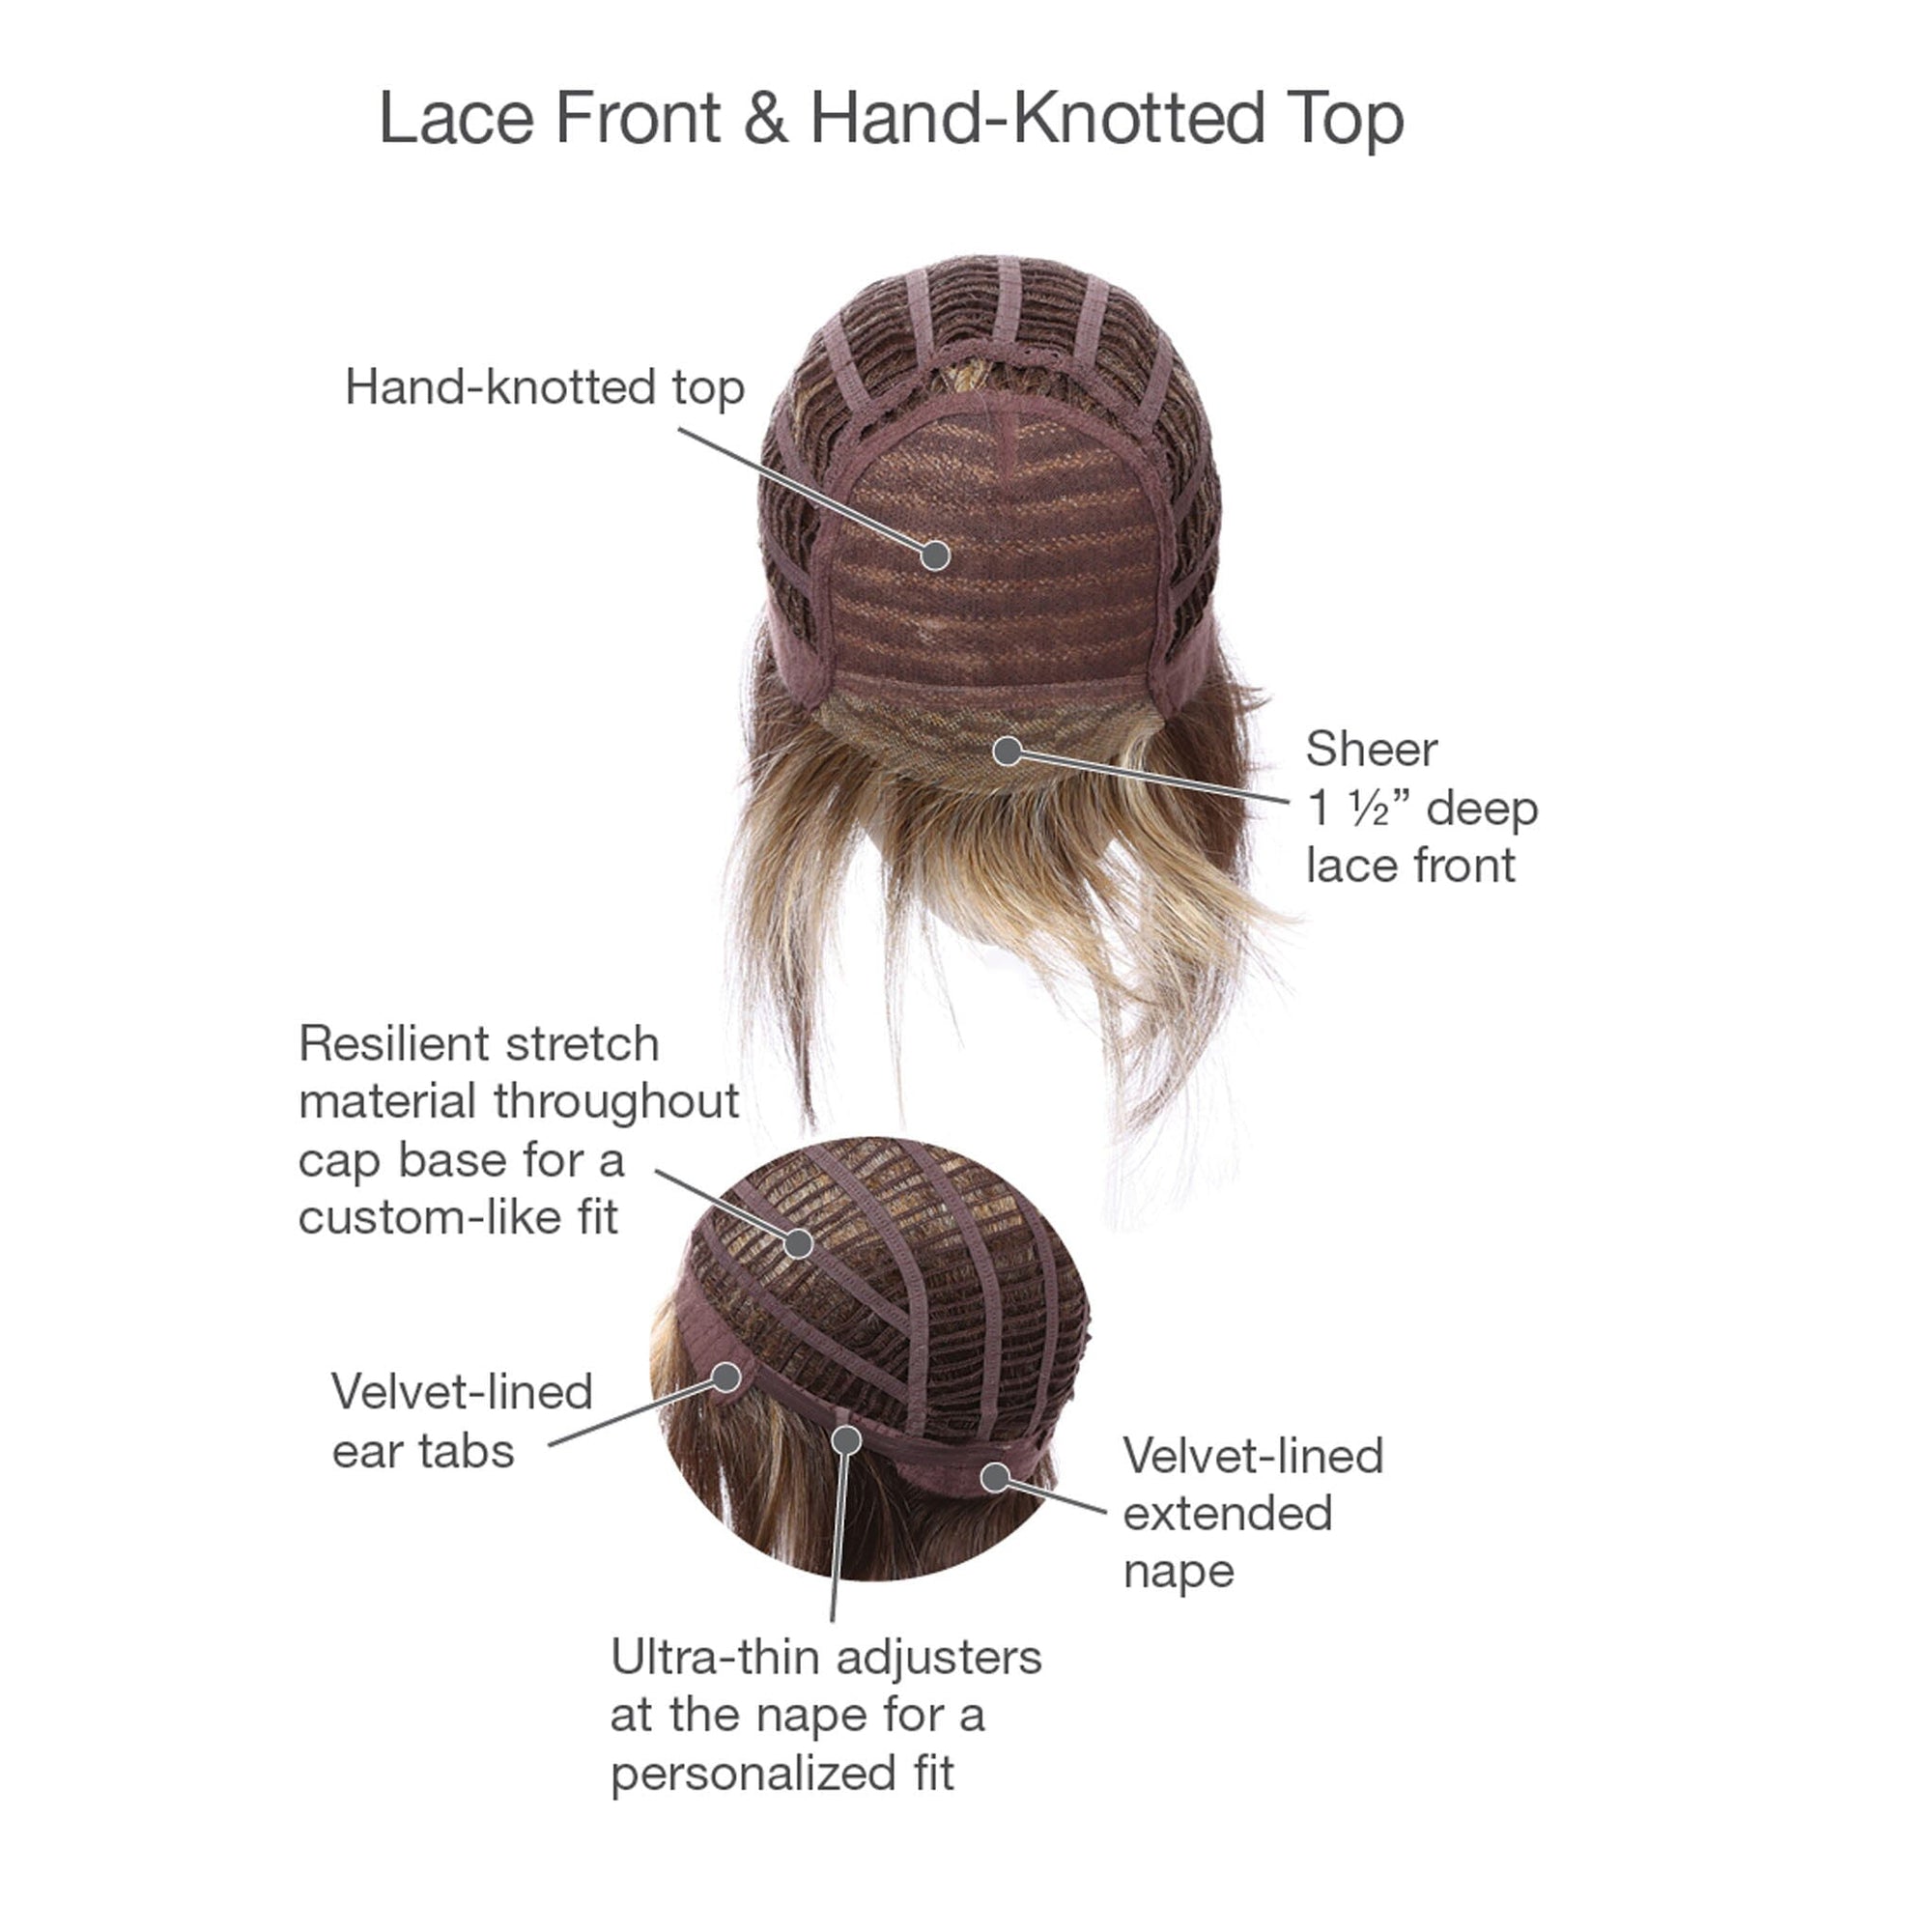 Lace Front Hand-Knotted Top